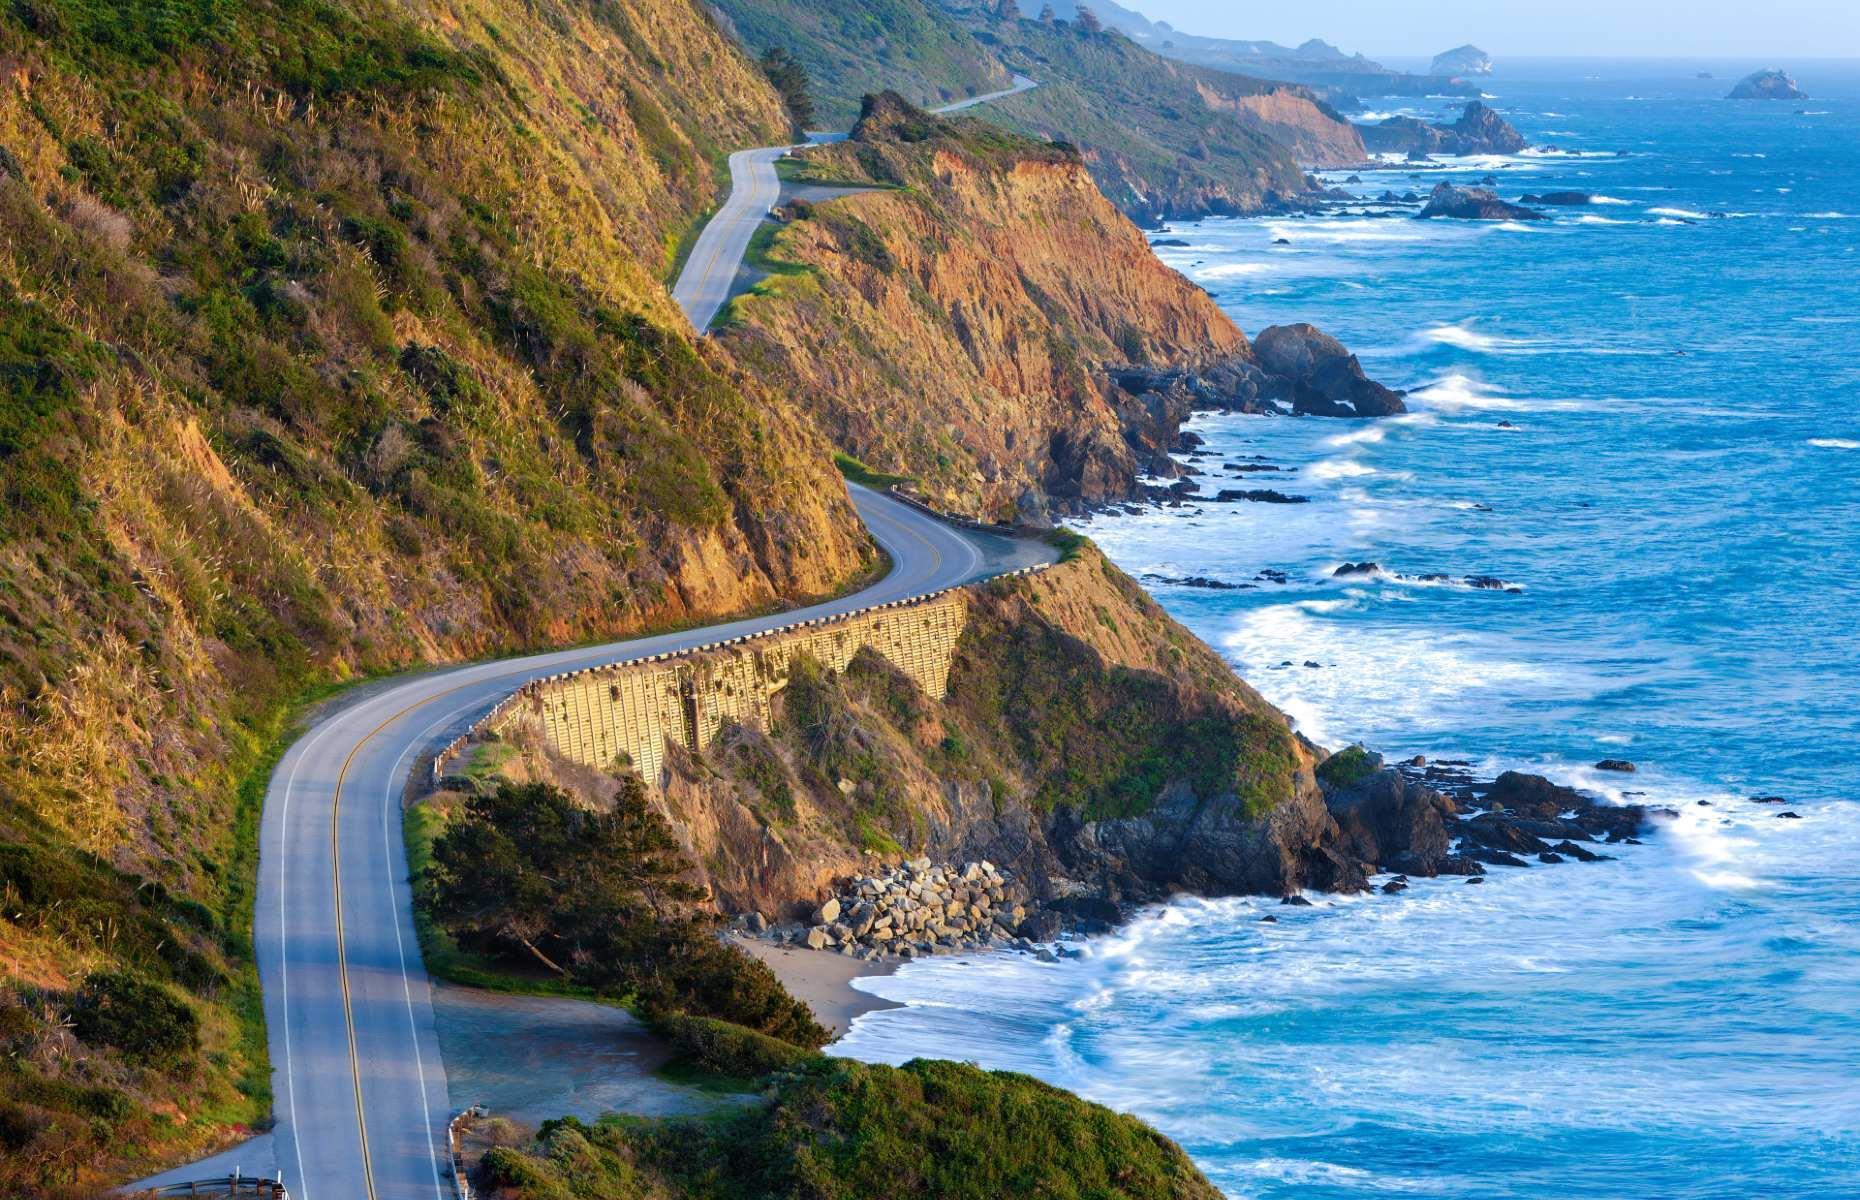 <p>Those looking to take an iconic American road trip in their EV would do well to consider California’s Big Sur. Along this 87-mile (139km) route, stretching between Carmel-by-the-Sea and San Simeon, there are 78 EV chargers in total, as well as plenty of stirring spots to stay and charge up. Larger groups should check out <a href="https://www.airbnb.co.uk/rooms/14024838">this coastal self-catering Airbnb</a>, which can host up to nine people and is located just along the coast from Big Sur village. Or try eco-friendly haven <a href="https://www.ventanabigsur.com/resort/green-initiatives">Ventura Big Sur</a>, which is equipped with eight Tesla chargers and two regular chargers. </p>